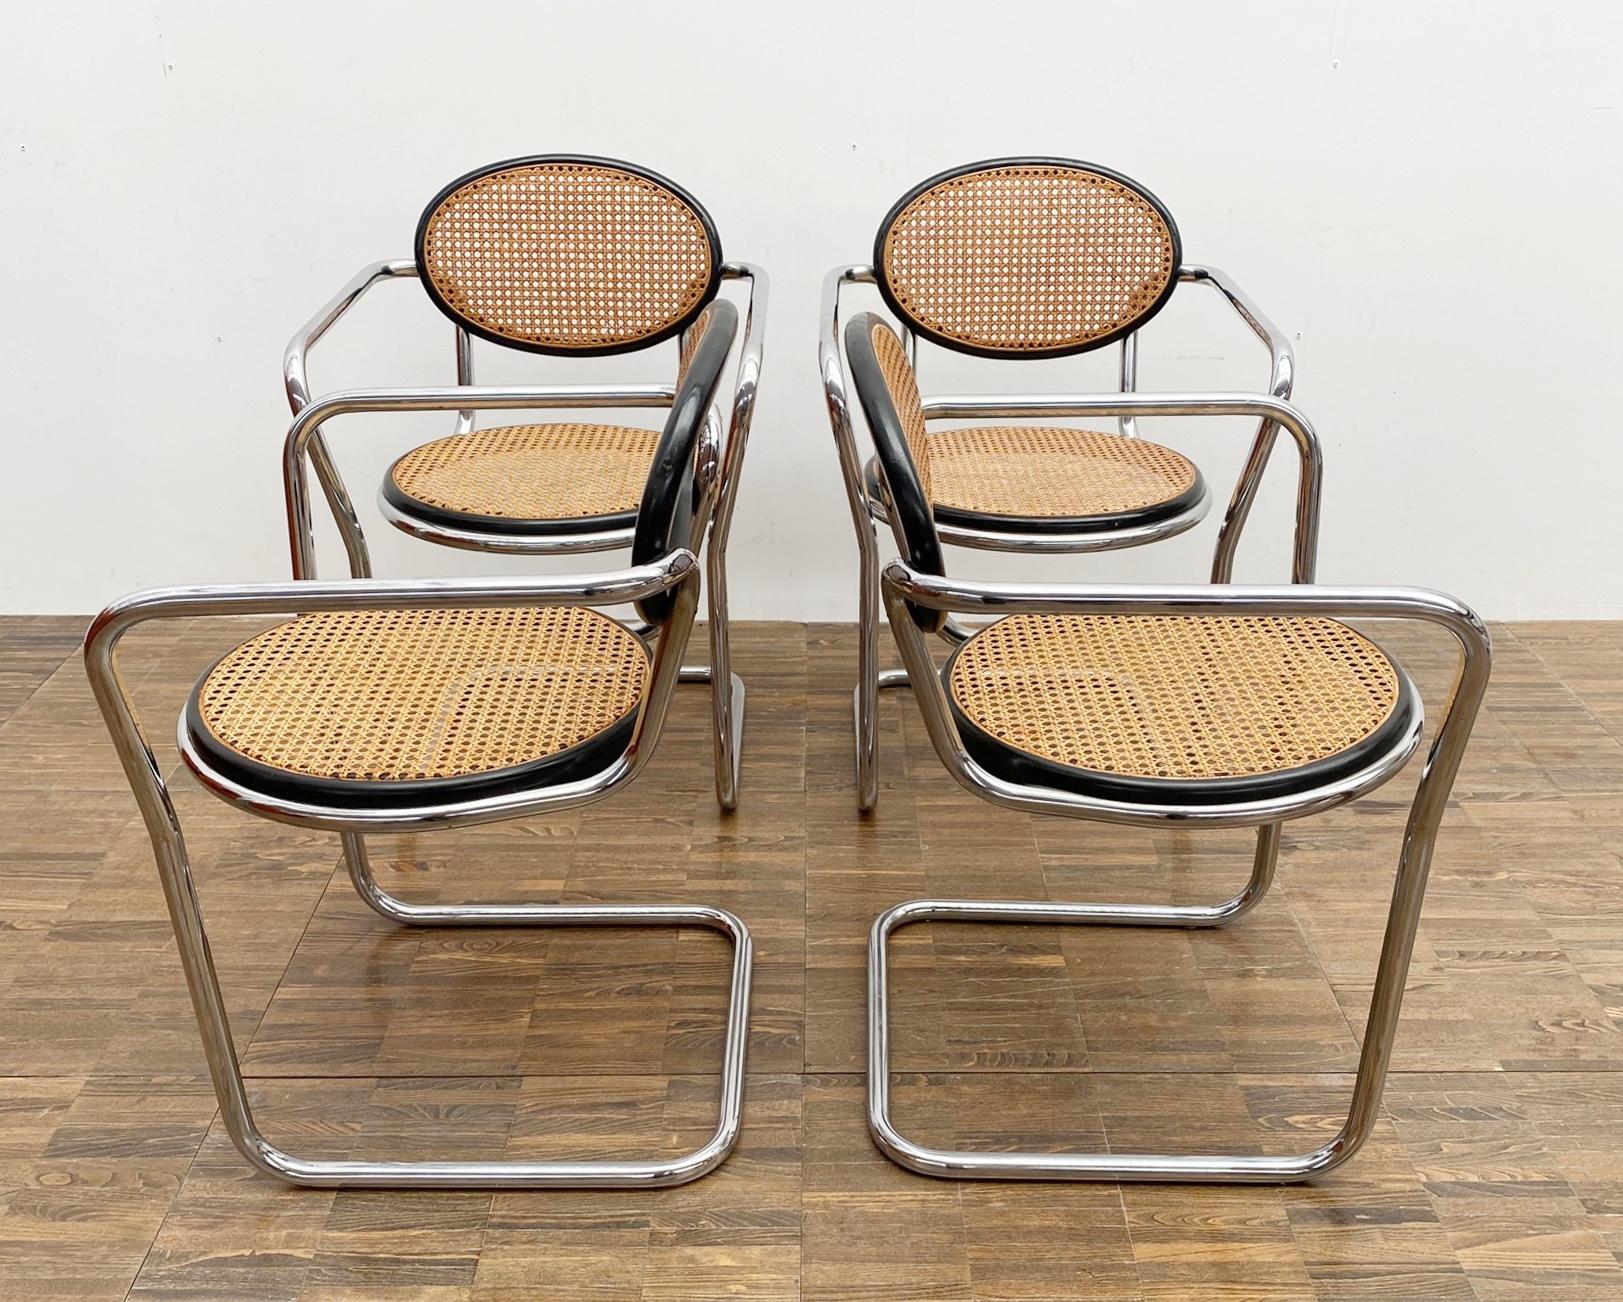 Set of 4 mid-century Italian tubular and caning chairs - 1970s.